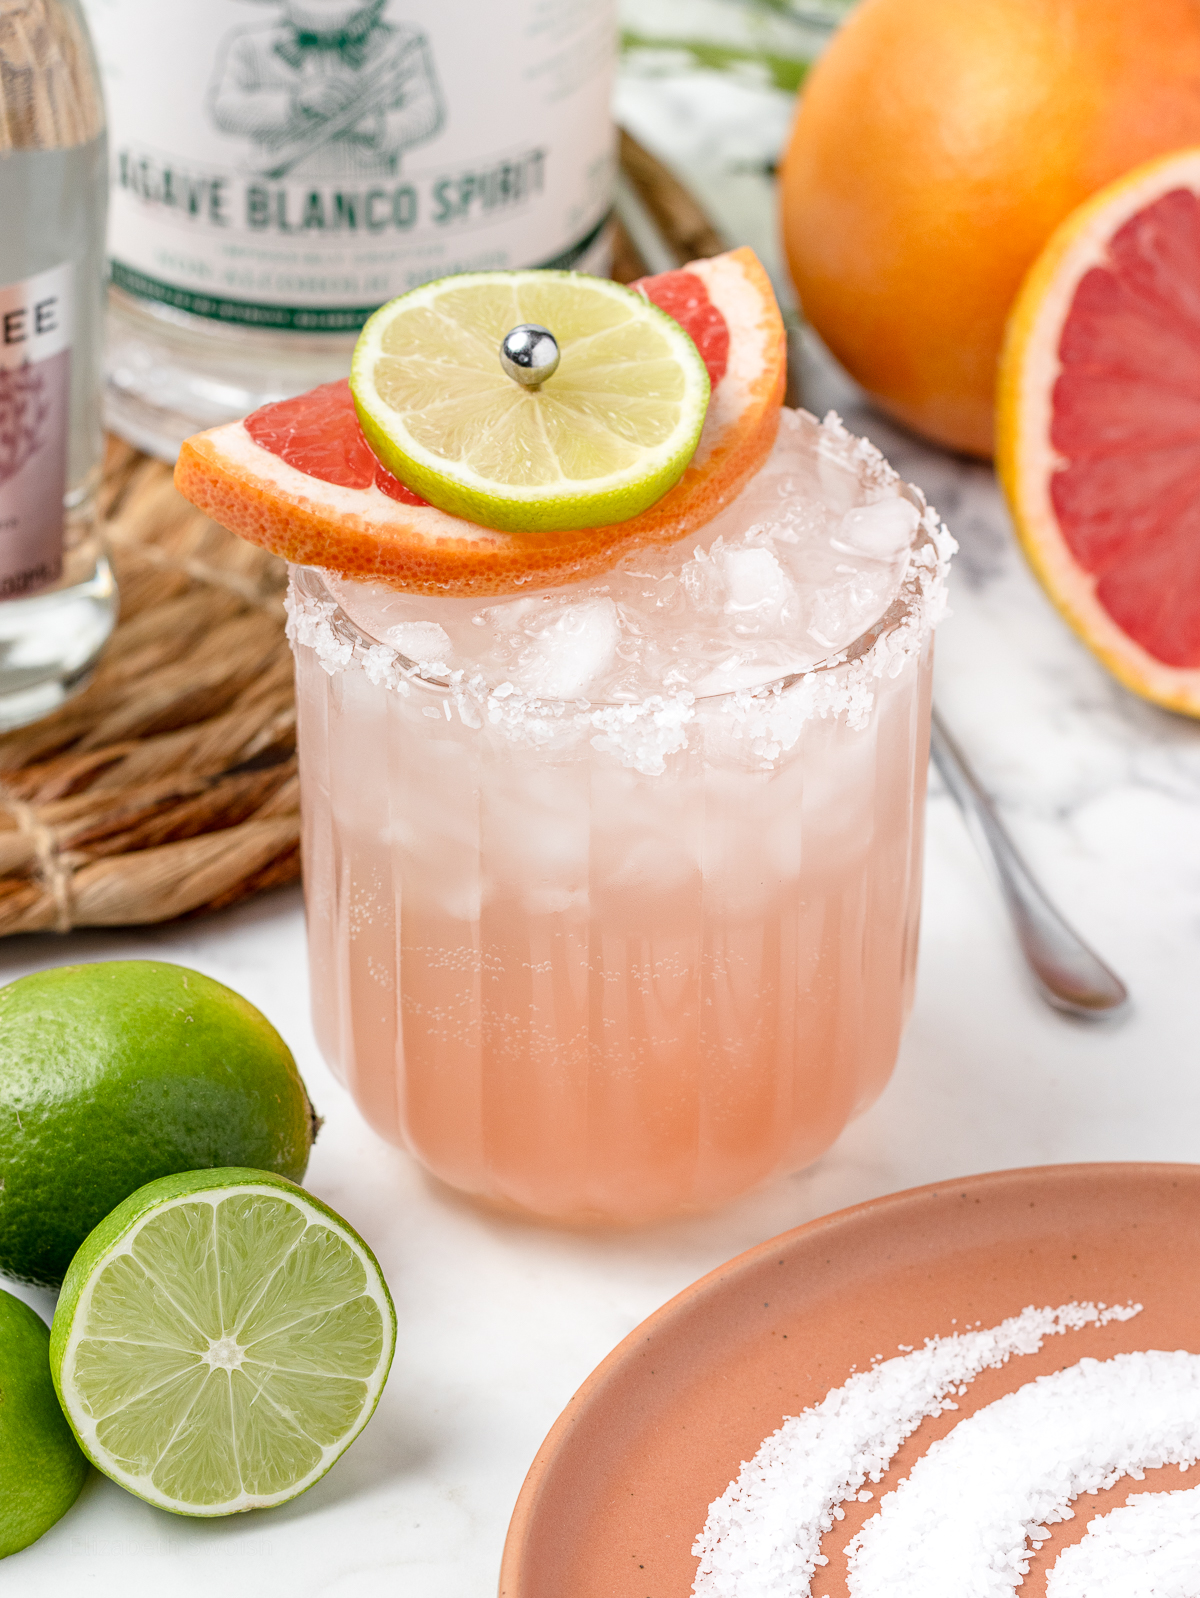 A Paloma Mocktail with ice, salted rim, and garnished with lime and grapefruit. The drink is surrounded by it's ingredients and a long handled stirrer.